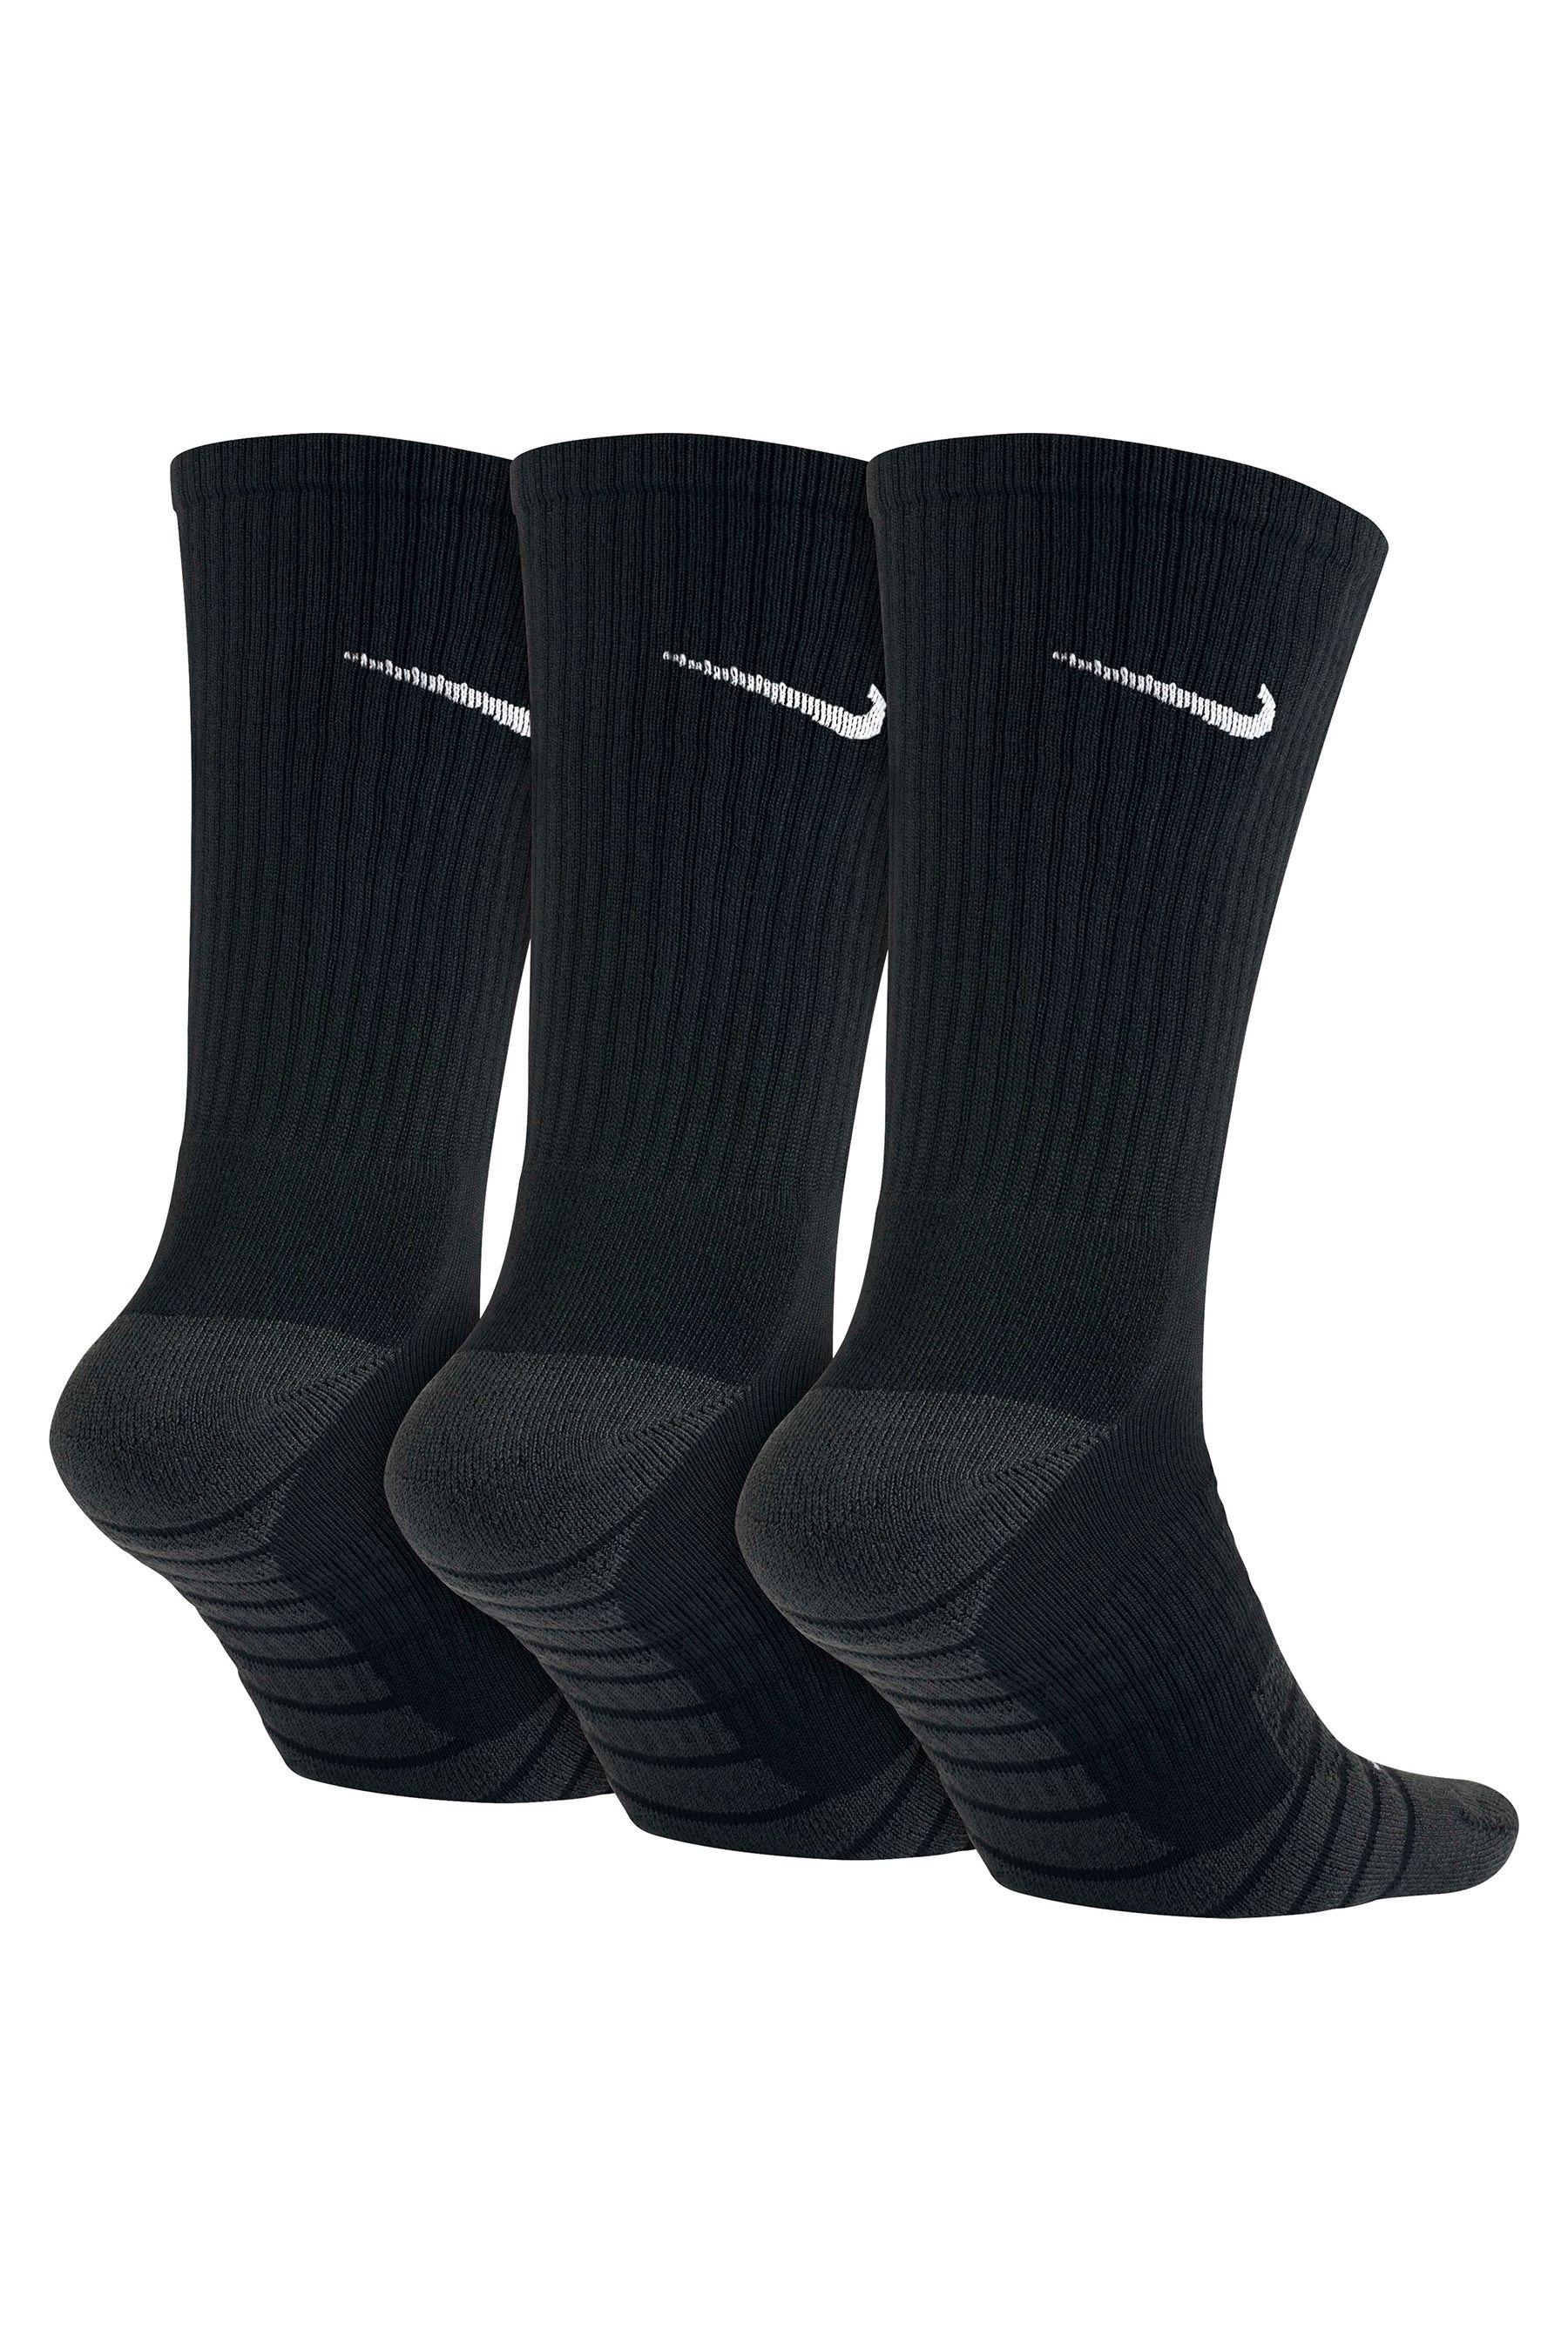 Buy Nike Black Cushioned Crew Socks 3 Pack from the Next UK online shop